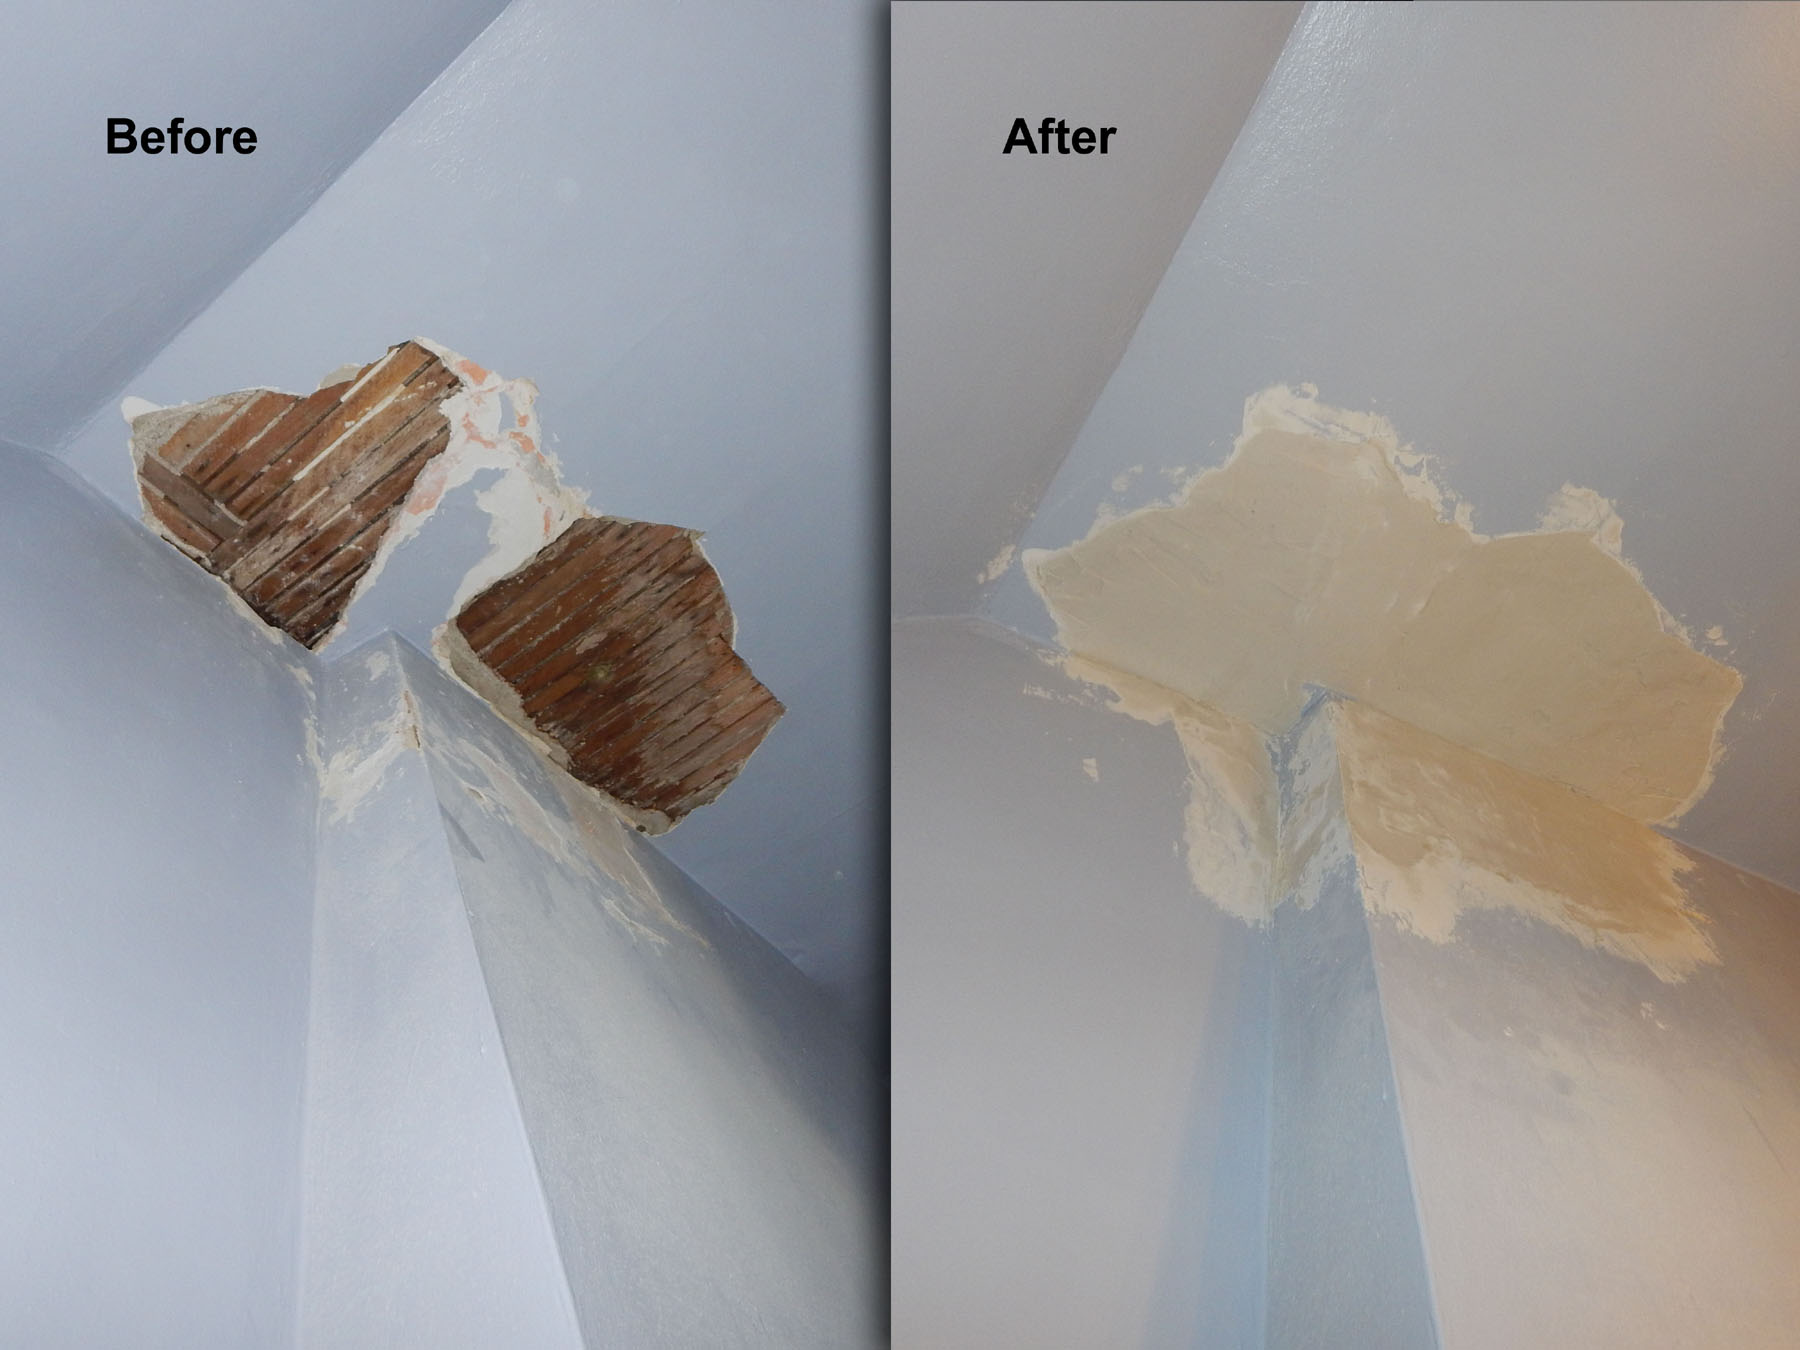 Before and After comparison of a Plaster Repair project